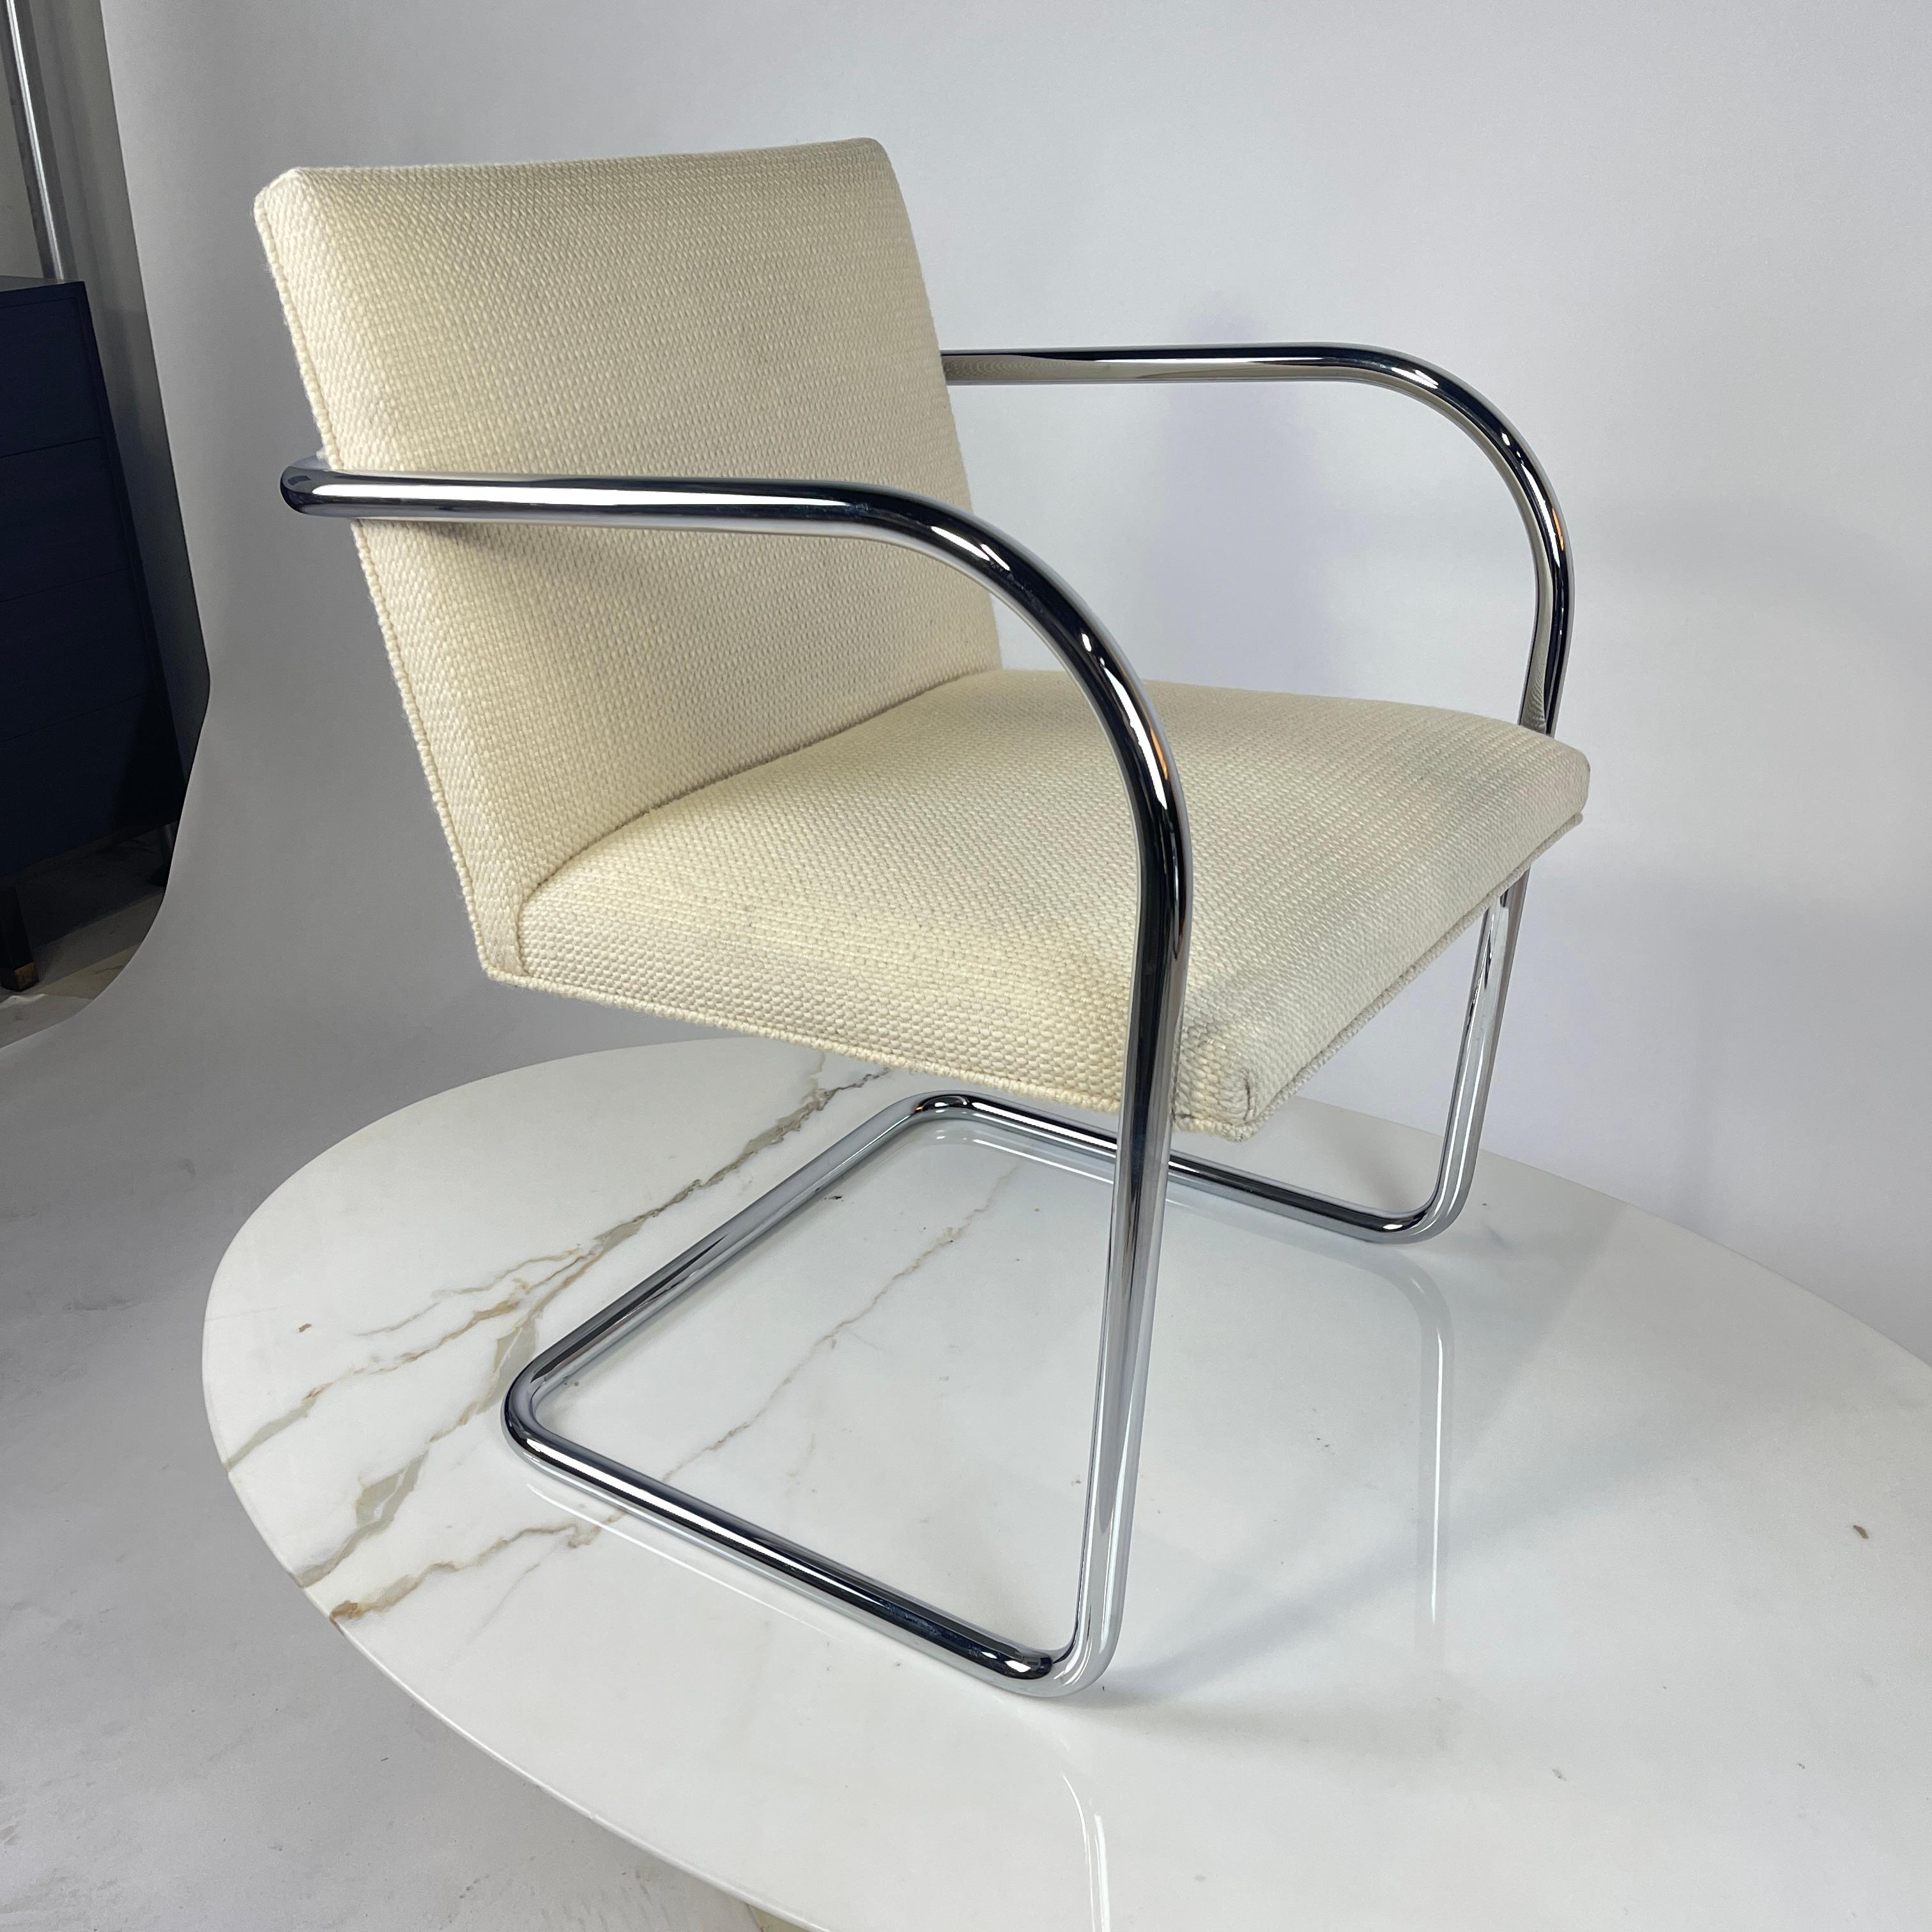 Mid-Century Modern Mies Van Der Rohe for Knoll Brno Chair in Cato Upholstery 60 available For Sale